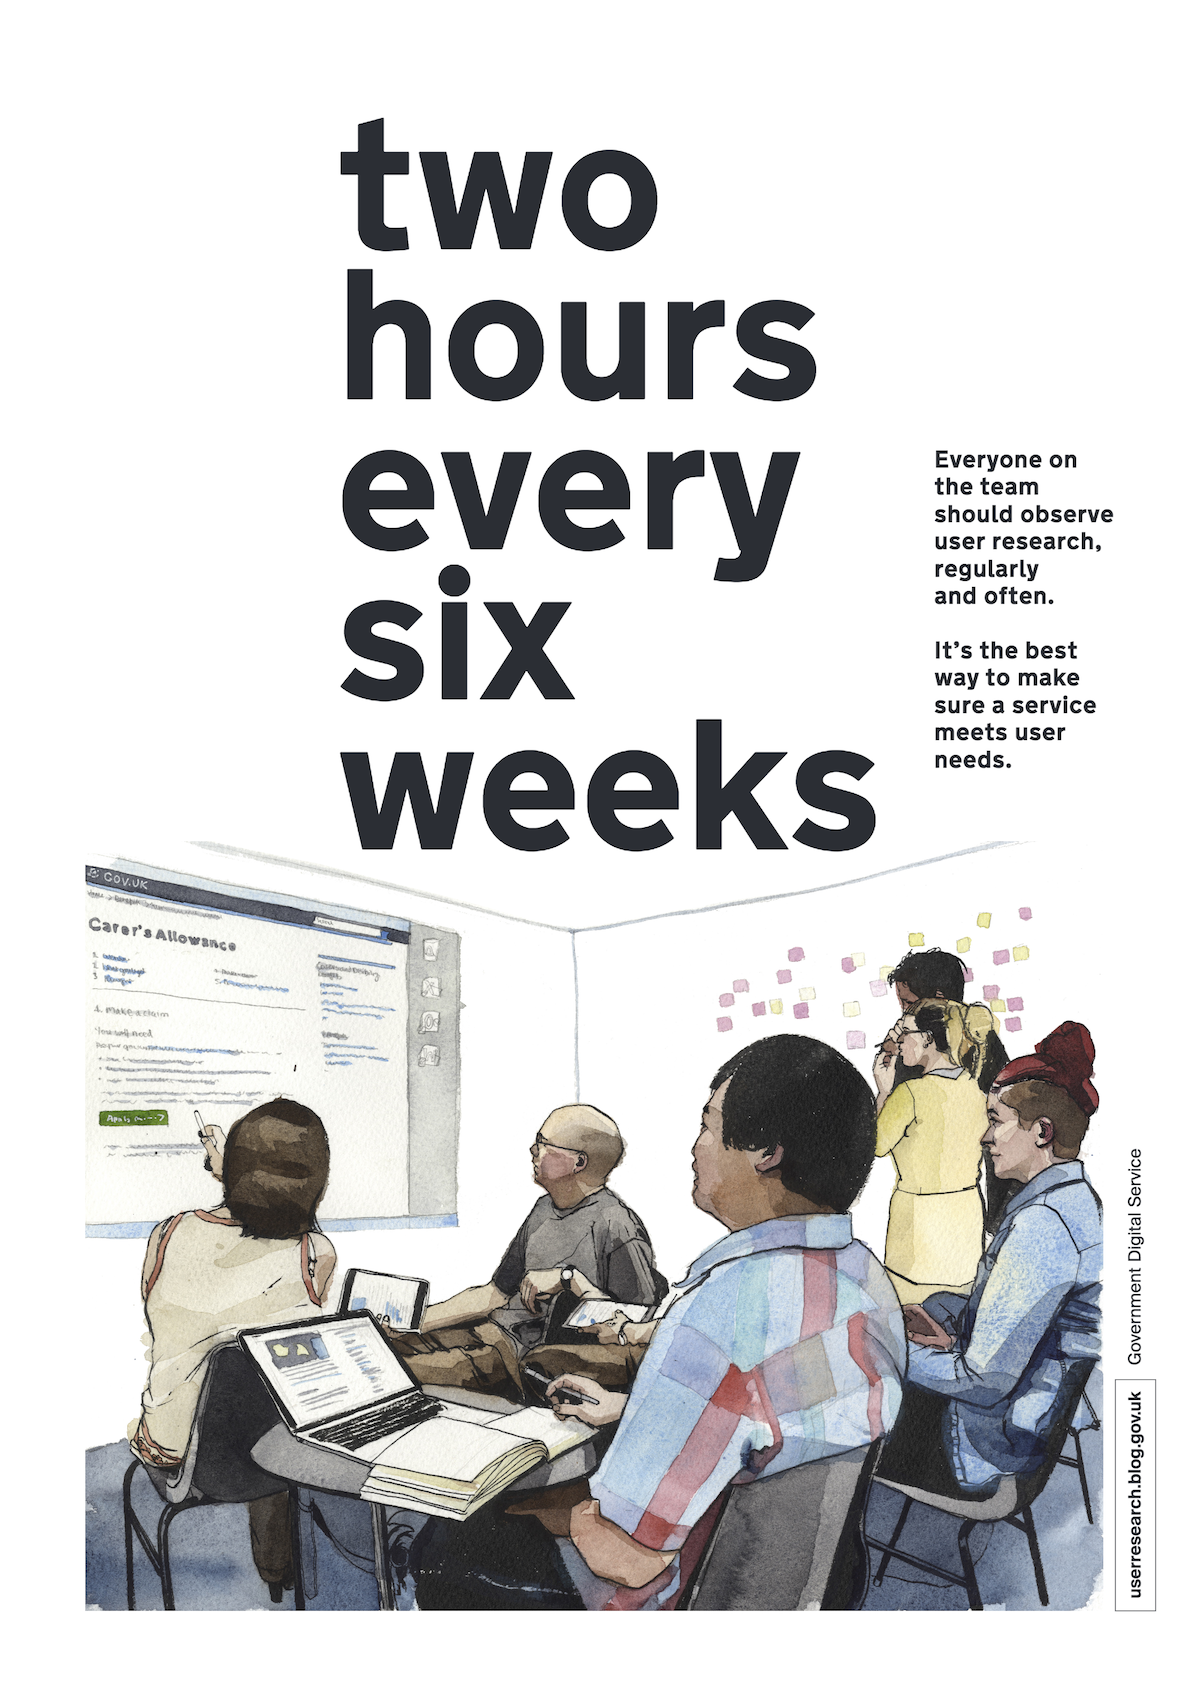 2hrs every 6 weeks of user research